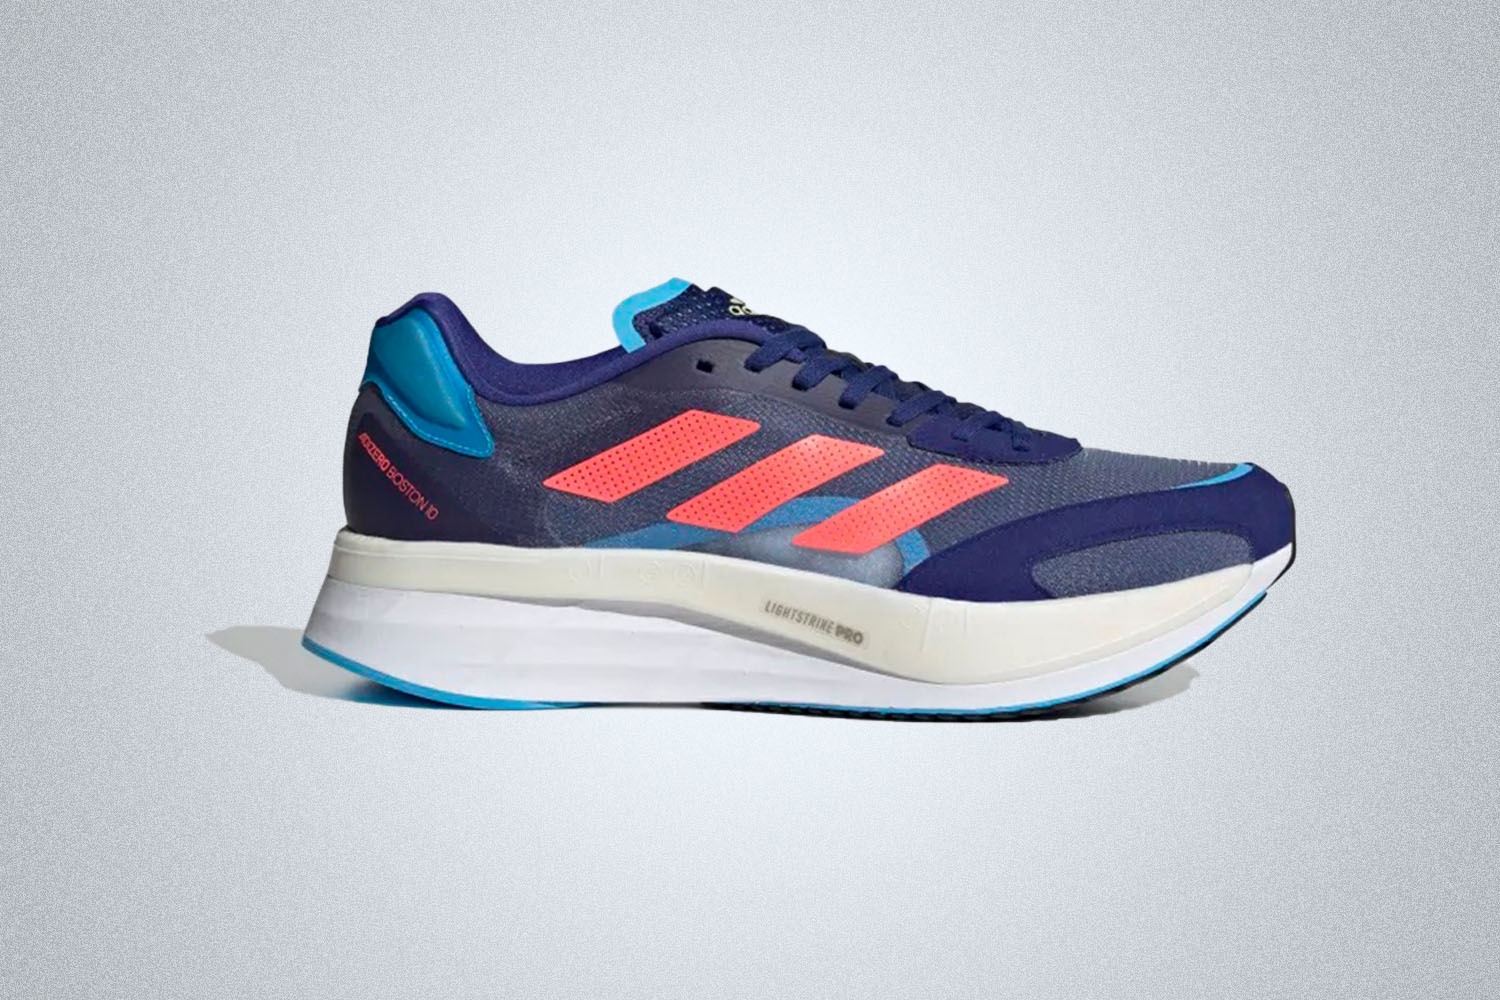 a pair of blue Boston 10 running shoes with red accents and a large white sole from Adidas on a grey background